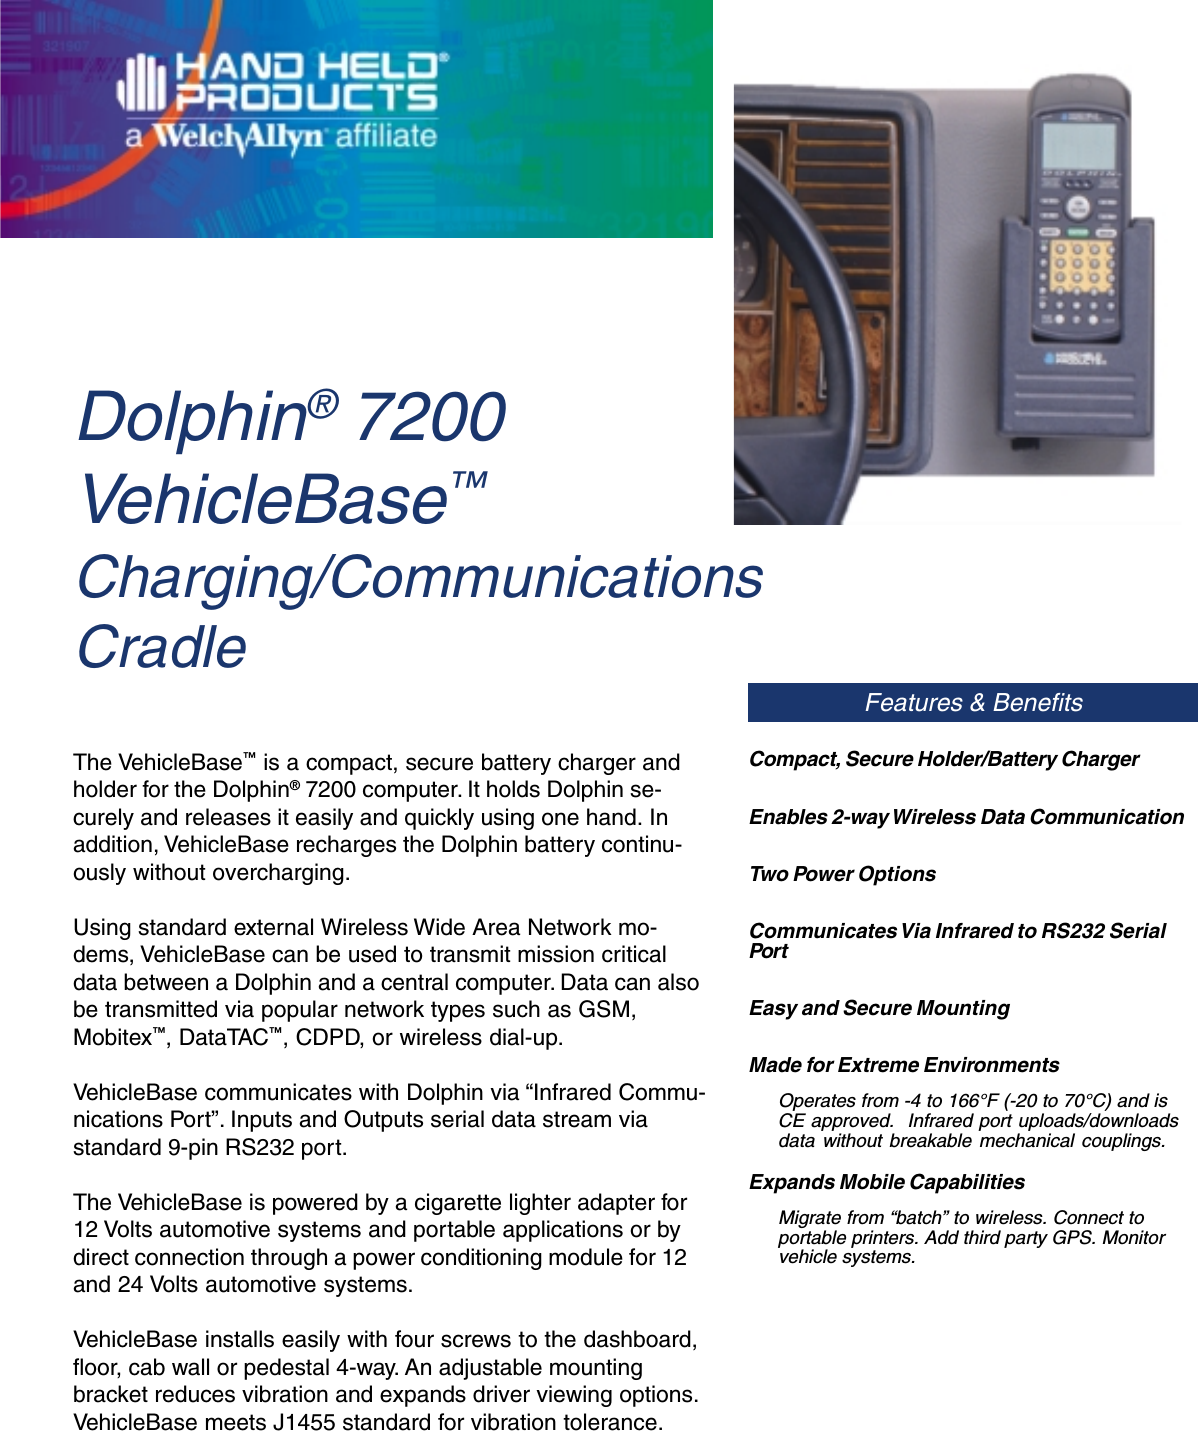 Dolphin® 7200VehicleBase™Charging/CommunicationsCradleFeatures &amp; BenefitsThe VehicleBase™ is a compact, secure battery charger andholder for the Dolphin® 7200 computer. It holds Dolphin se-curely and releases it easily and quickly using one hand. Inaddition, VehicleBase recharges the Dolphin battery continu-ously without overcharging.Using standard external Wireless Wide Area Network mo-dems, VehicleBase can be used to transmit mission criticaldata between a Dolphin and a central computer. Data can alsobe transmitted via popular network types such as GSM,Mobitex™, DataTAC™, CDPD, or wireless dial-up.VehicleBase communicates with Dolphin via “Infrared Commu-nications Port”. Inputs and Outputs serial data stream viastandard 9-pin RS232 port.The VehicleBase is powered by a cigarette lighter adapter for12 Volts automotive systems and portable applications or bydirect connection through a power conditioning module for 12and 24 Volts automotive systems.VehicleBase installs easily with four screws to the dashboard,floor, cab wall or pedestal 4-way. An adjustable mountingbracket reduces vibration and expands driver viewing options.VehicleBase meets J1455 standard for vibration tolerance.Compact, Secure Holder/Battery ChargerEnables 2-way Wireless Data CommunicationTwo Power OptionsCommunicates Via Infrared to RS232 SerialPortEasy and Secure MountingMade for Extreme EnvironmentsOperates from -4 to 166°F (-20 to 70°C) and isCE approved.  Infrared port uploads/downloadsdata without breakable mechanical couplings.Expands Mobile CapabilitiesMigrate from “batch” to wireless. Connect toportable printers. Add third party GPS. Monitorvehicle systems.